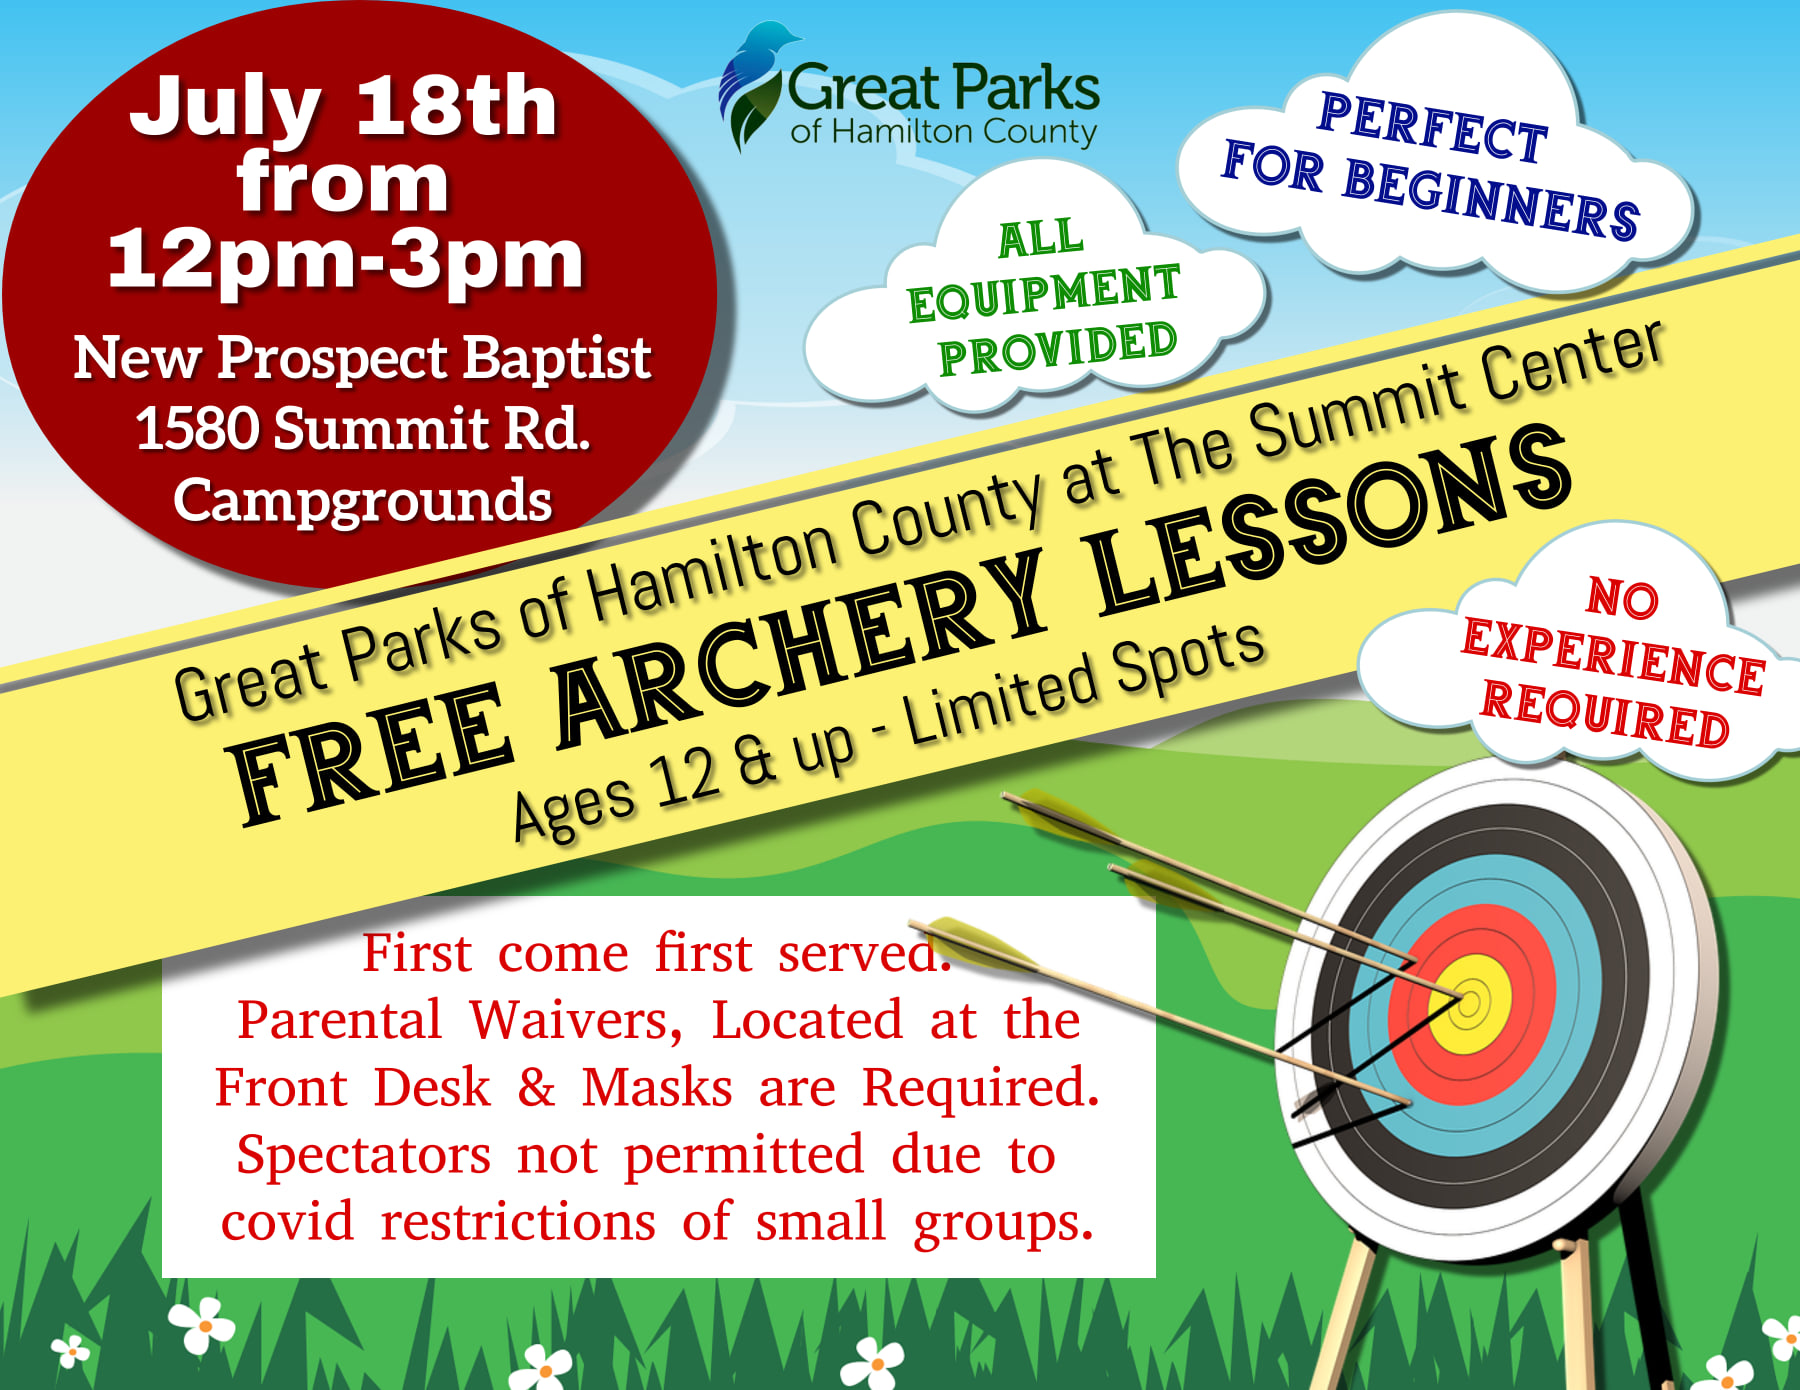 Free Archery Lesson at Great Parks Nature Center at The Summit on Sunday, July 18th 12 p.m. - 3 p.m.